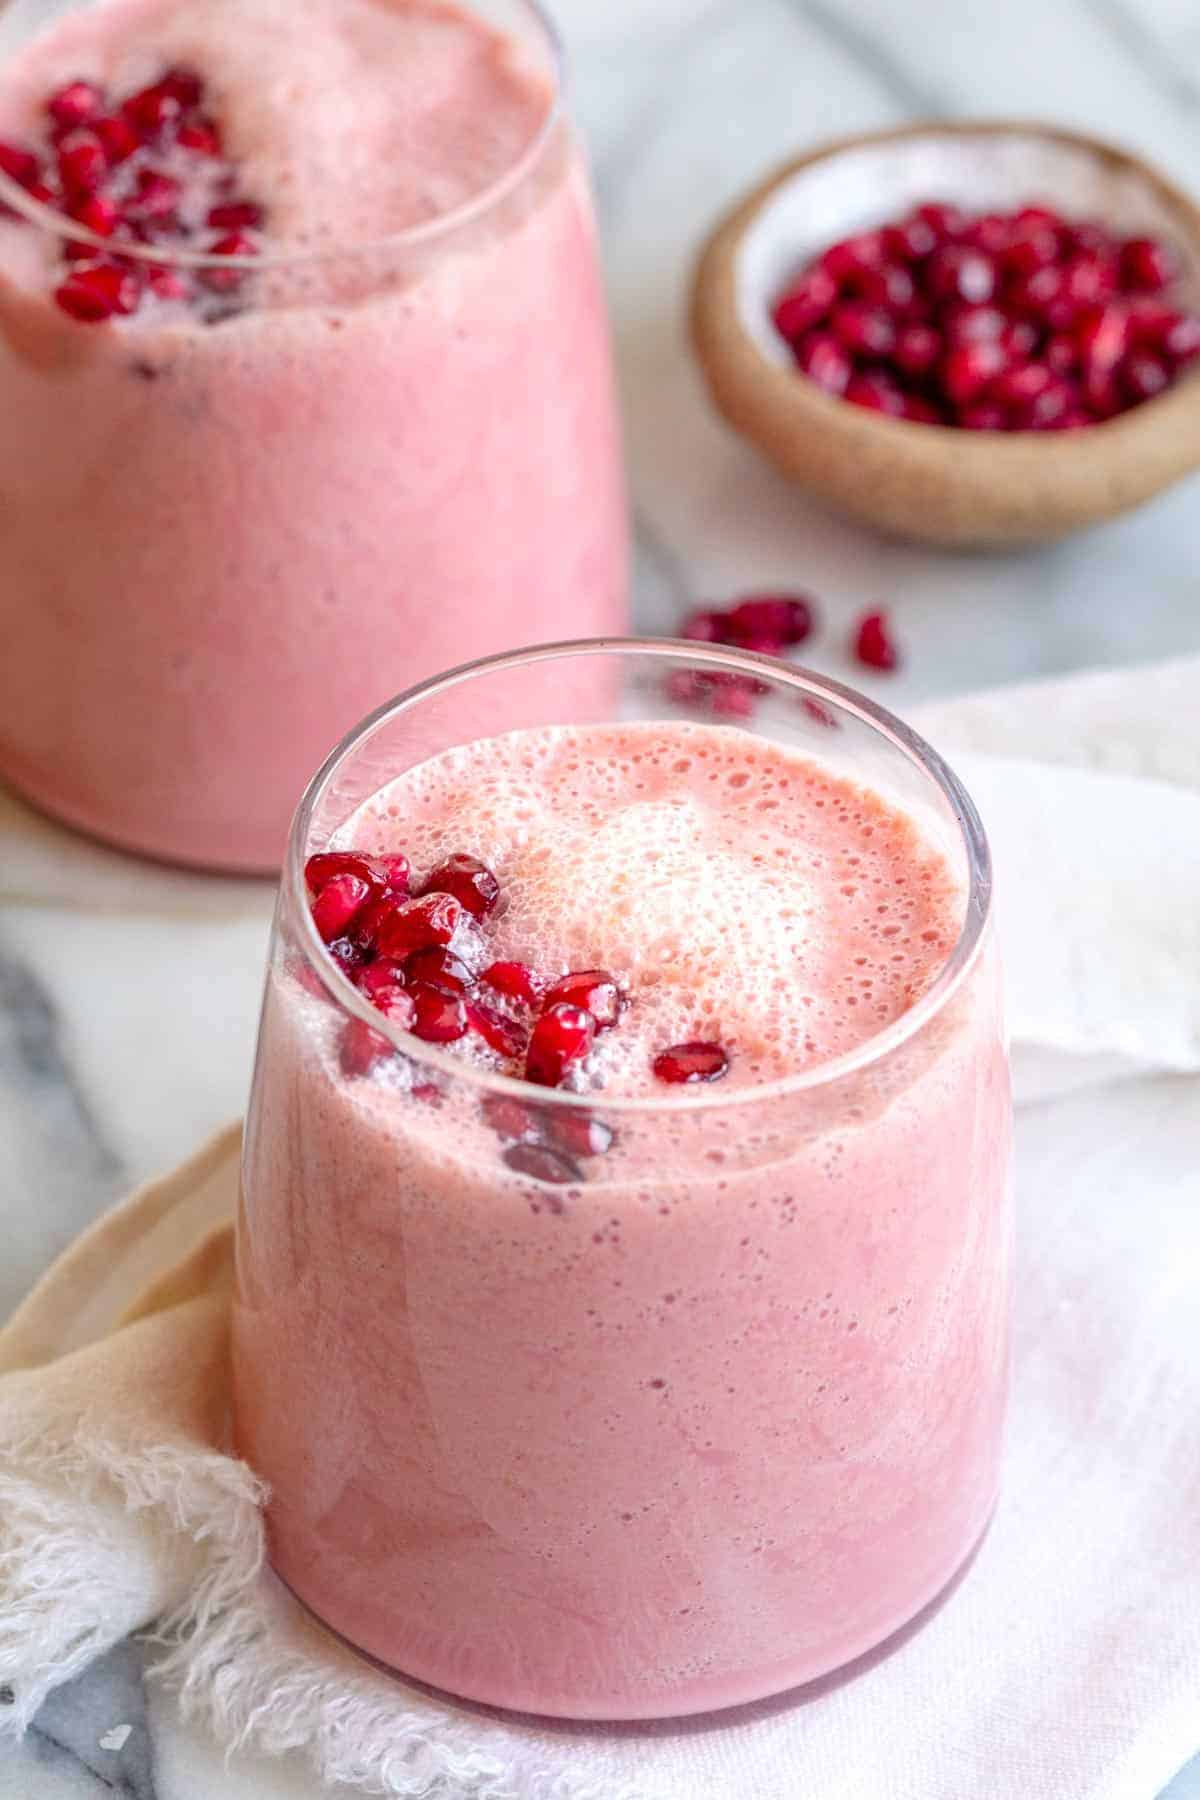 Can You Make A Smoothie With Pomegranate Seeds? 